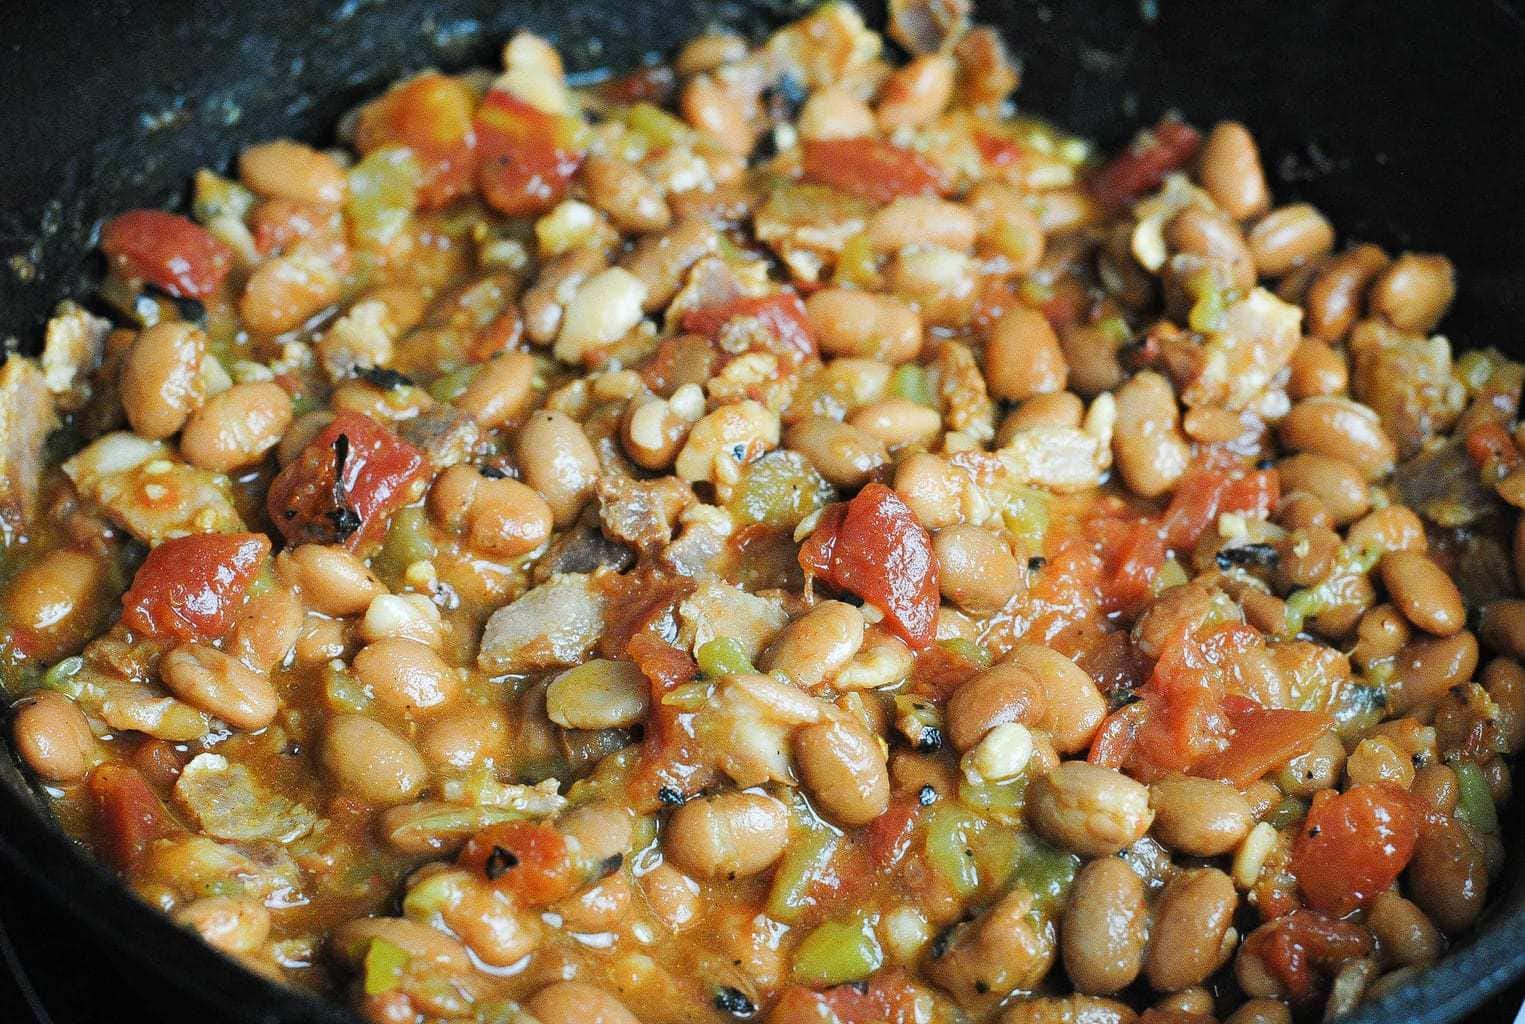 cowboy pinto beans in the iron skillet